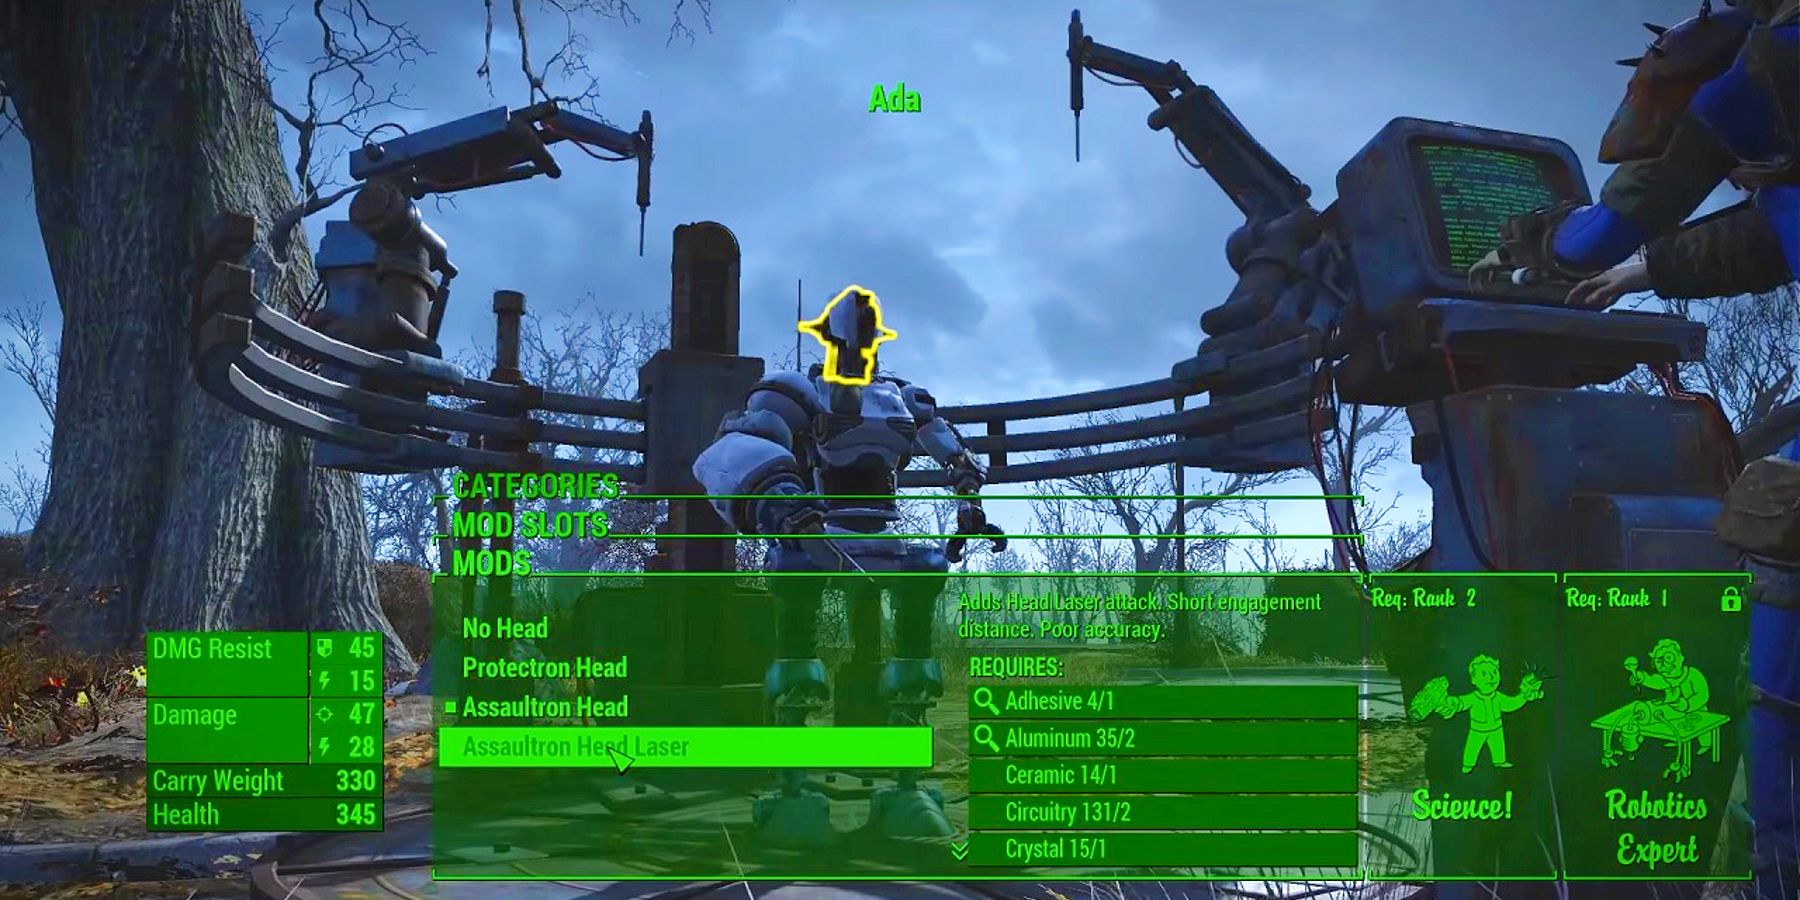 best fallout 3 companion mod - #145857645 added by dndxplain at